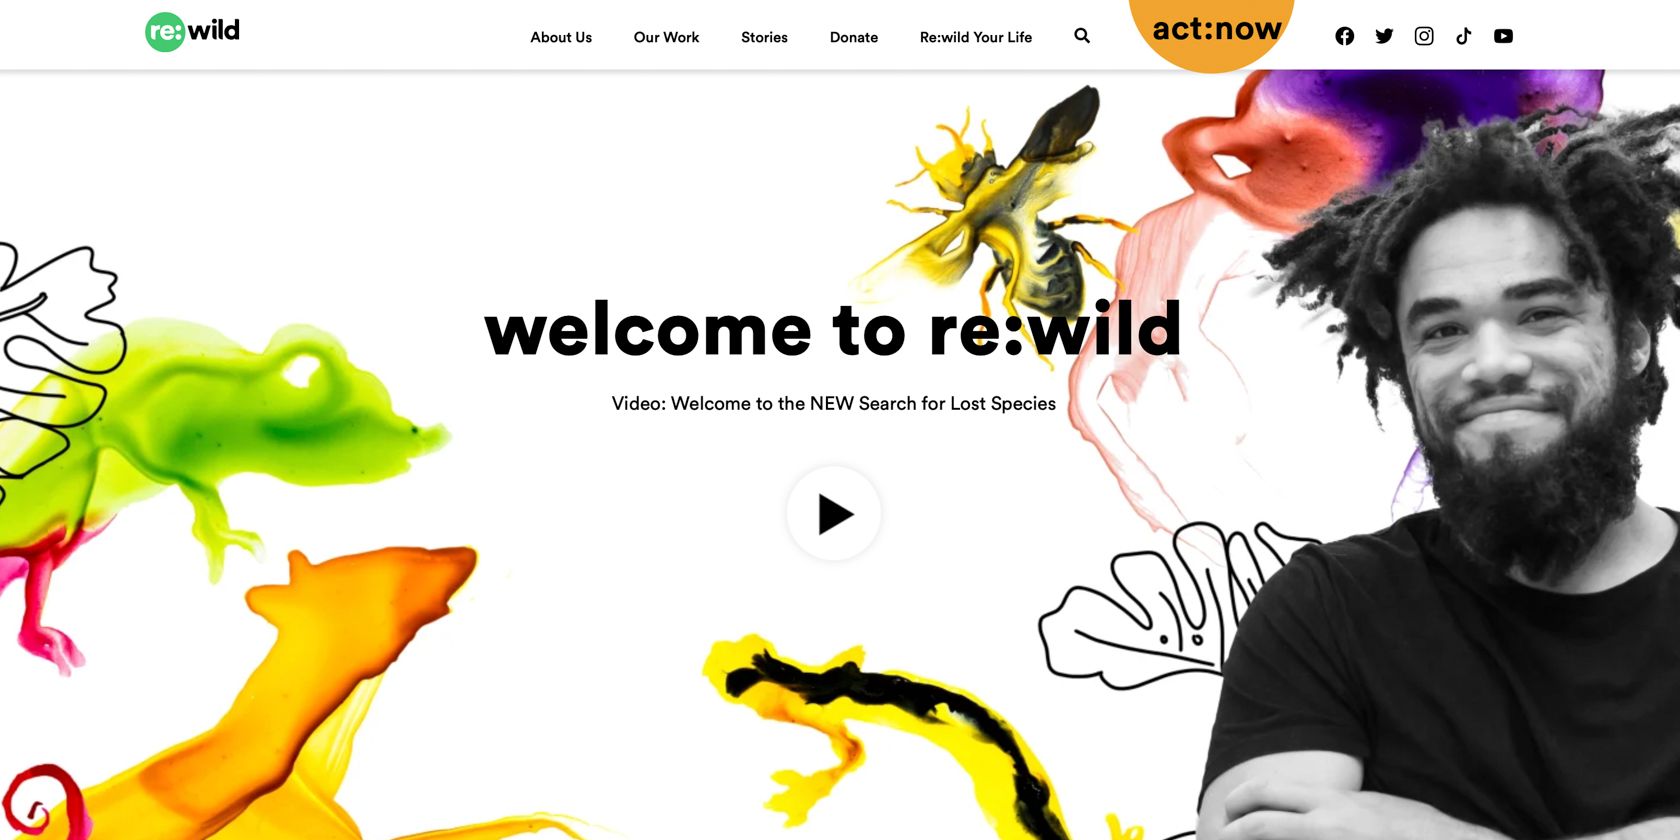 Screenshot-showing-the-rewild-website-home-page-1